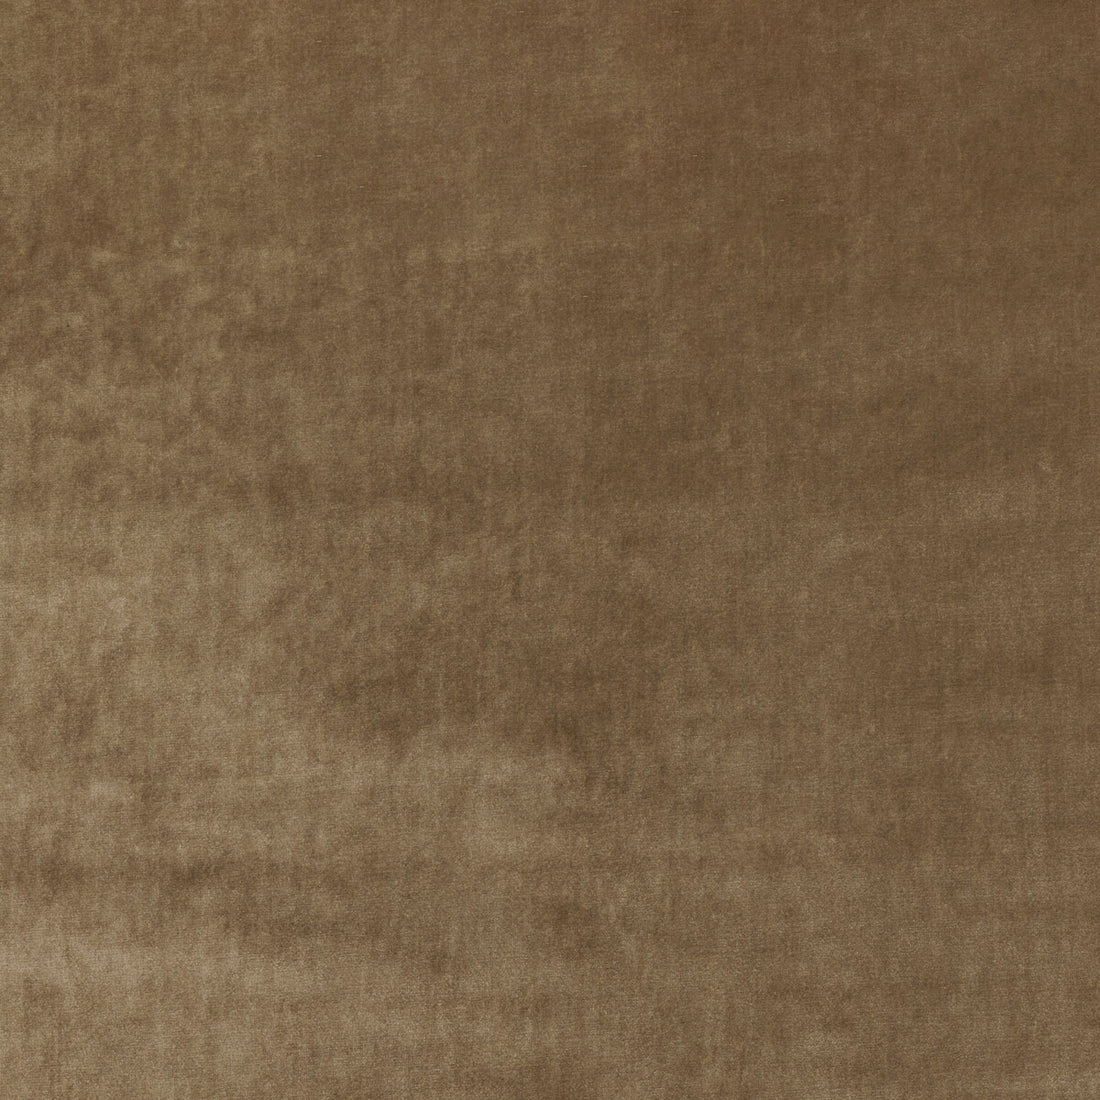 New Elegance fabric in camel color - pattern 36063.16.0 - by Kravet Couture